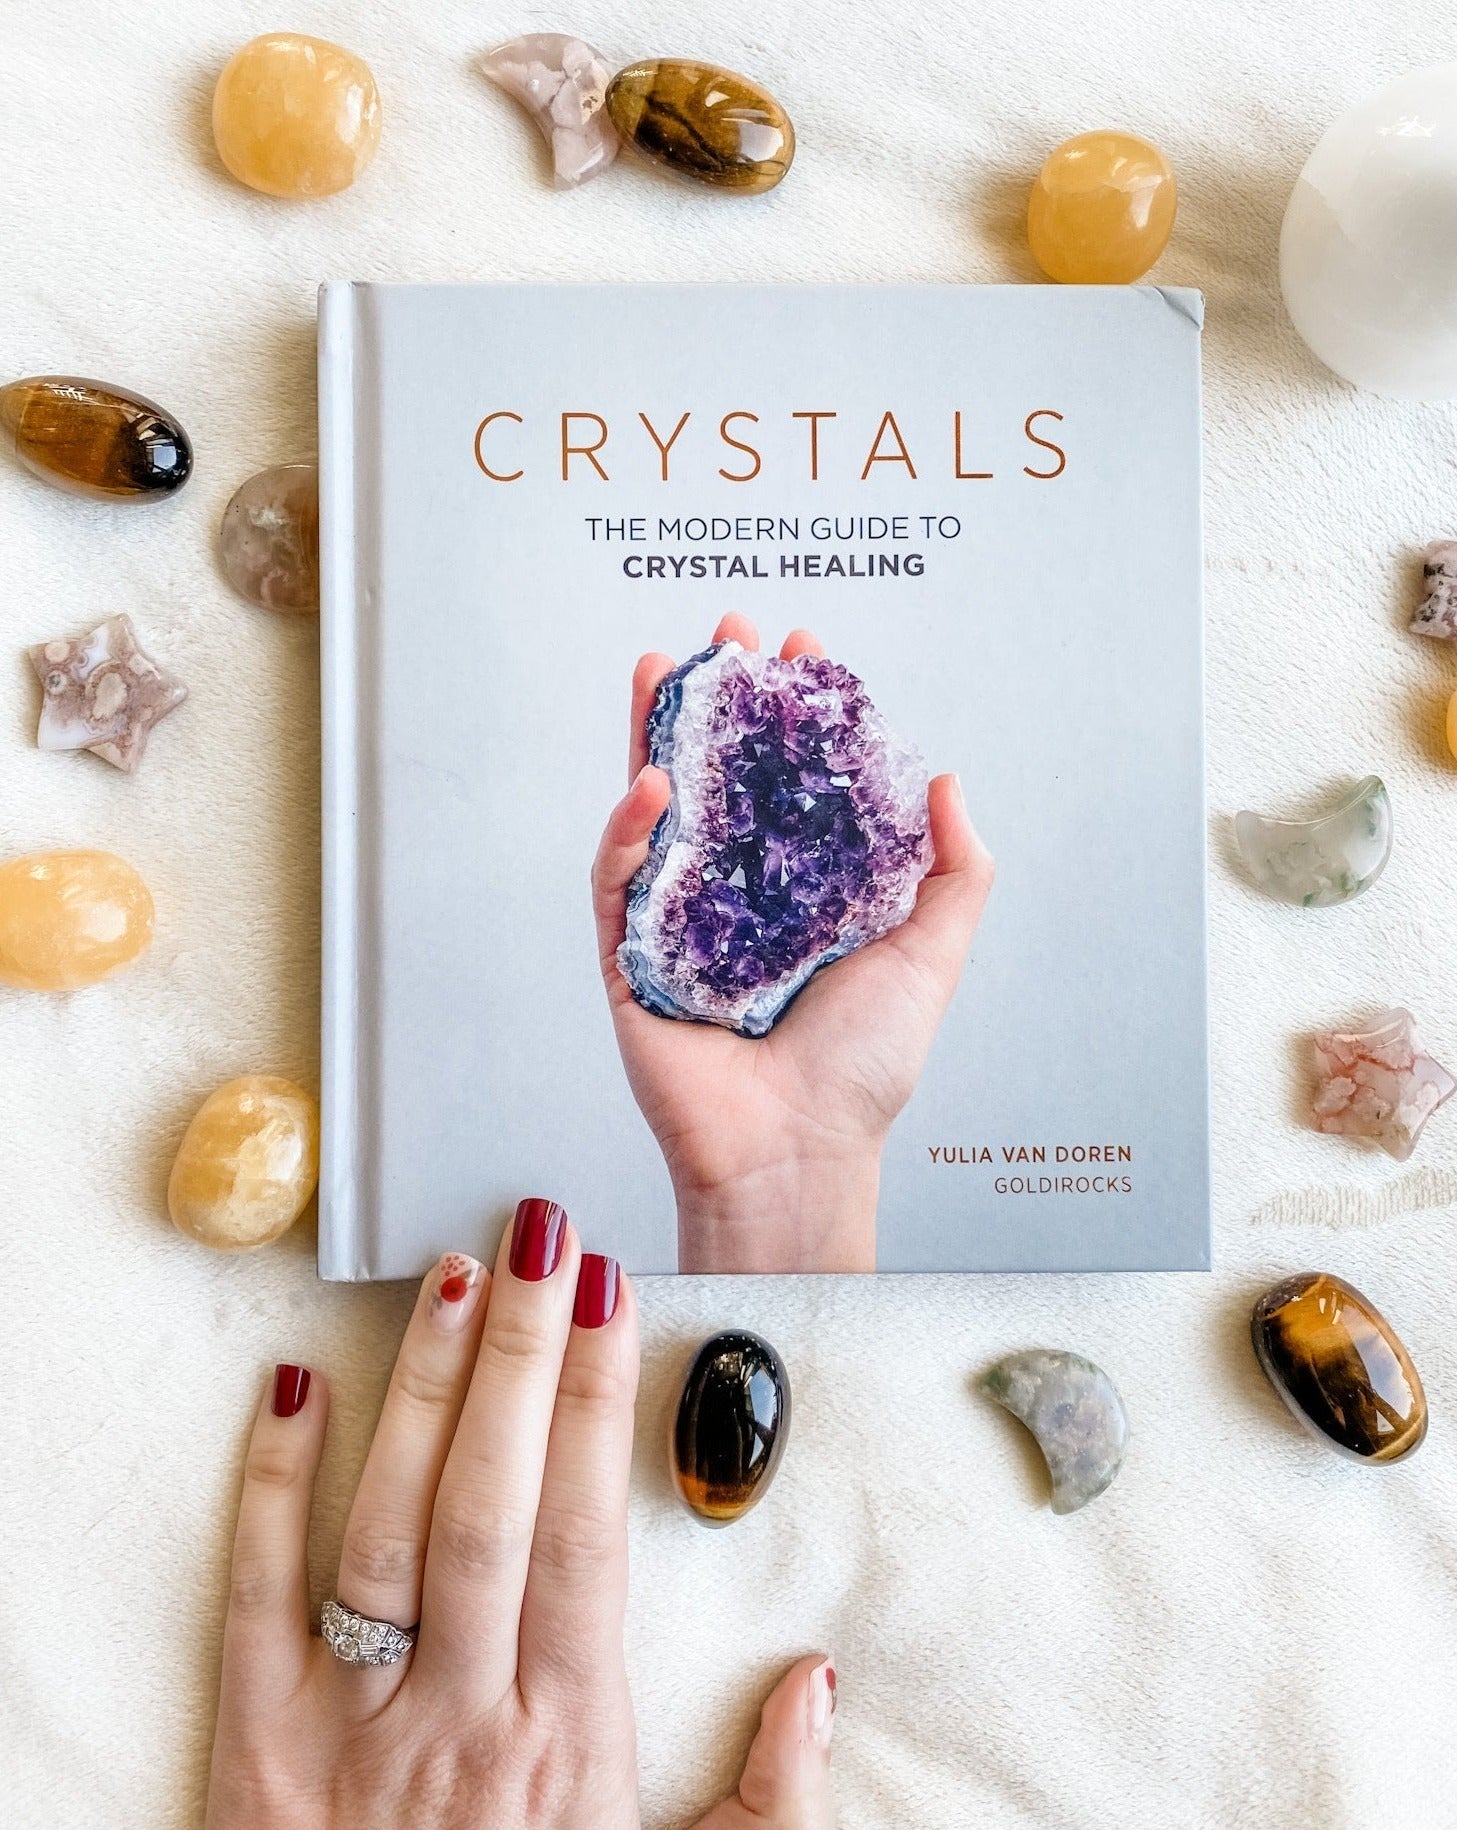 Yulia　Whimsy　Modern　Crystals:　Van　Wellness　Doren　Guide　Crystal　to　by　–　The　Healing